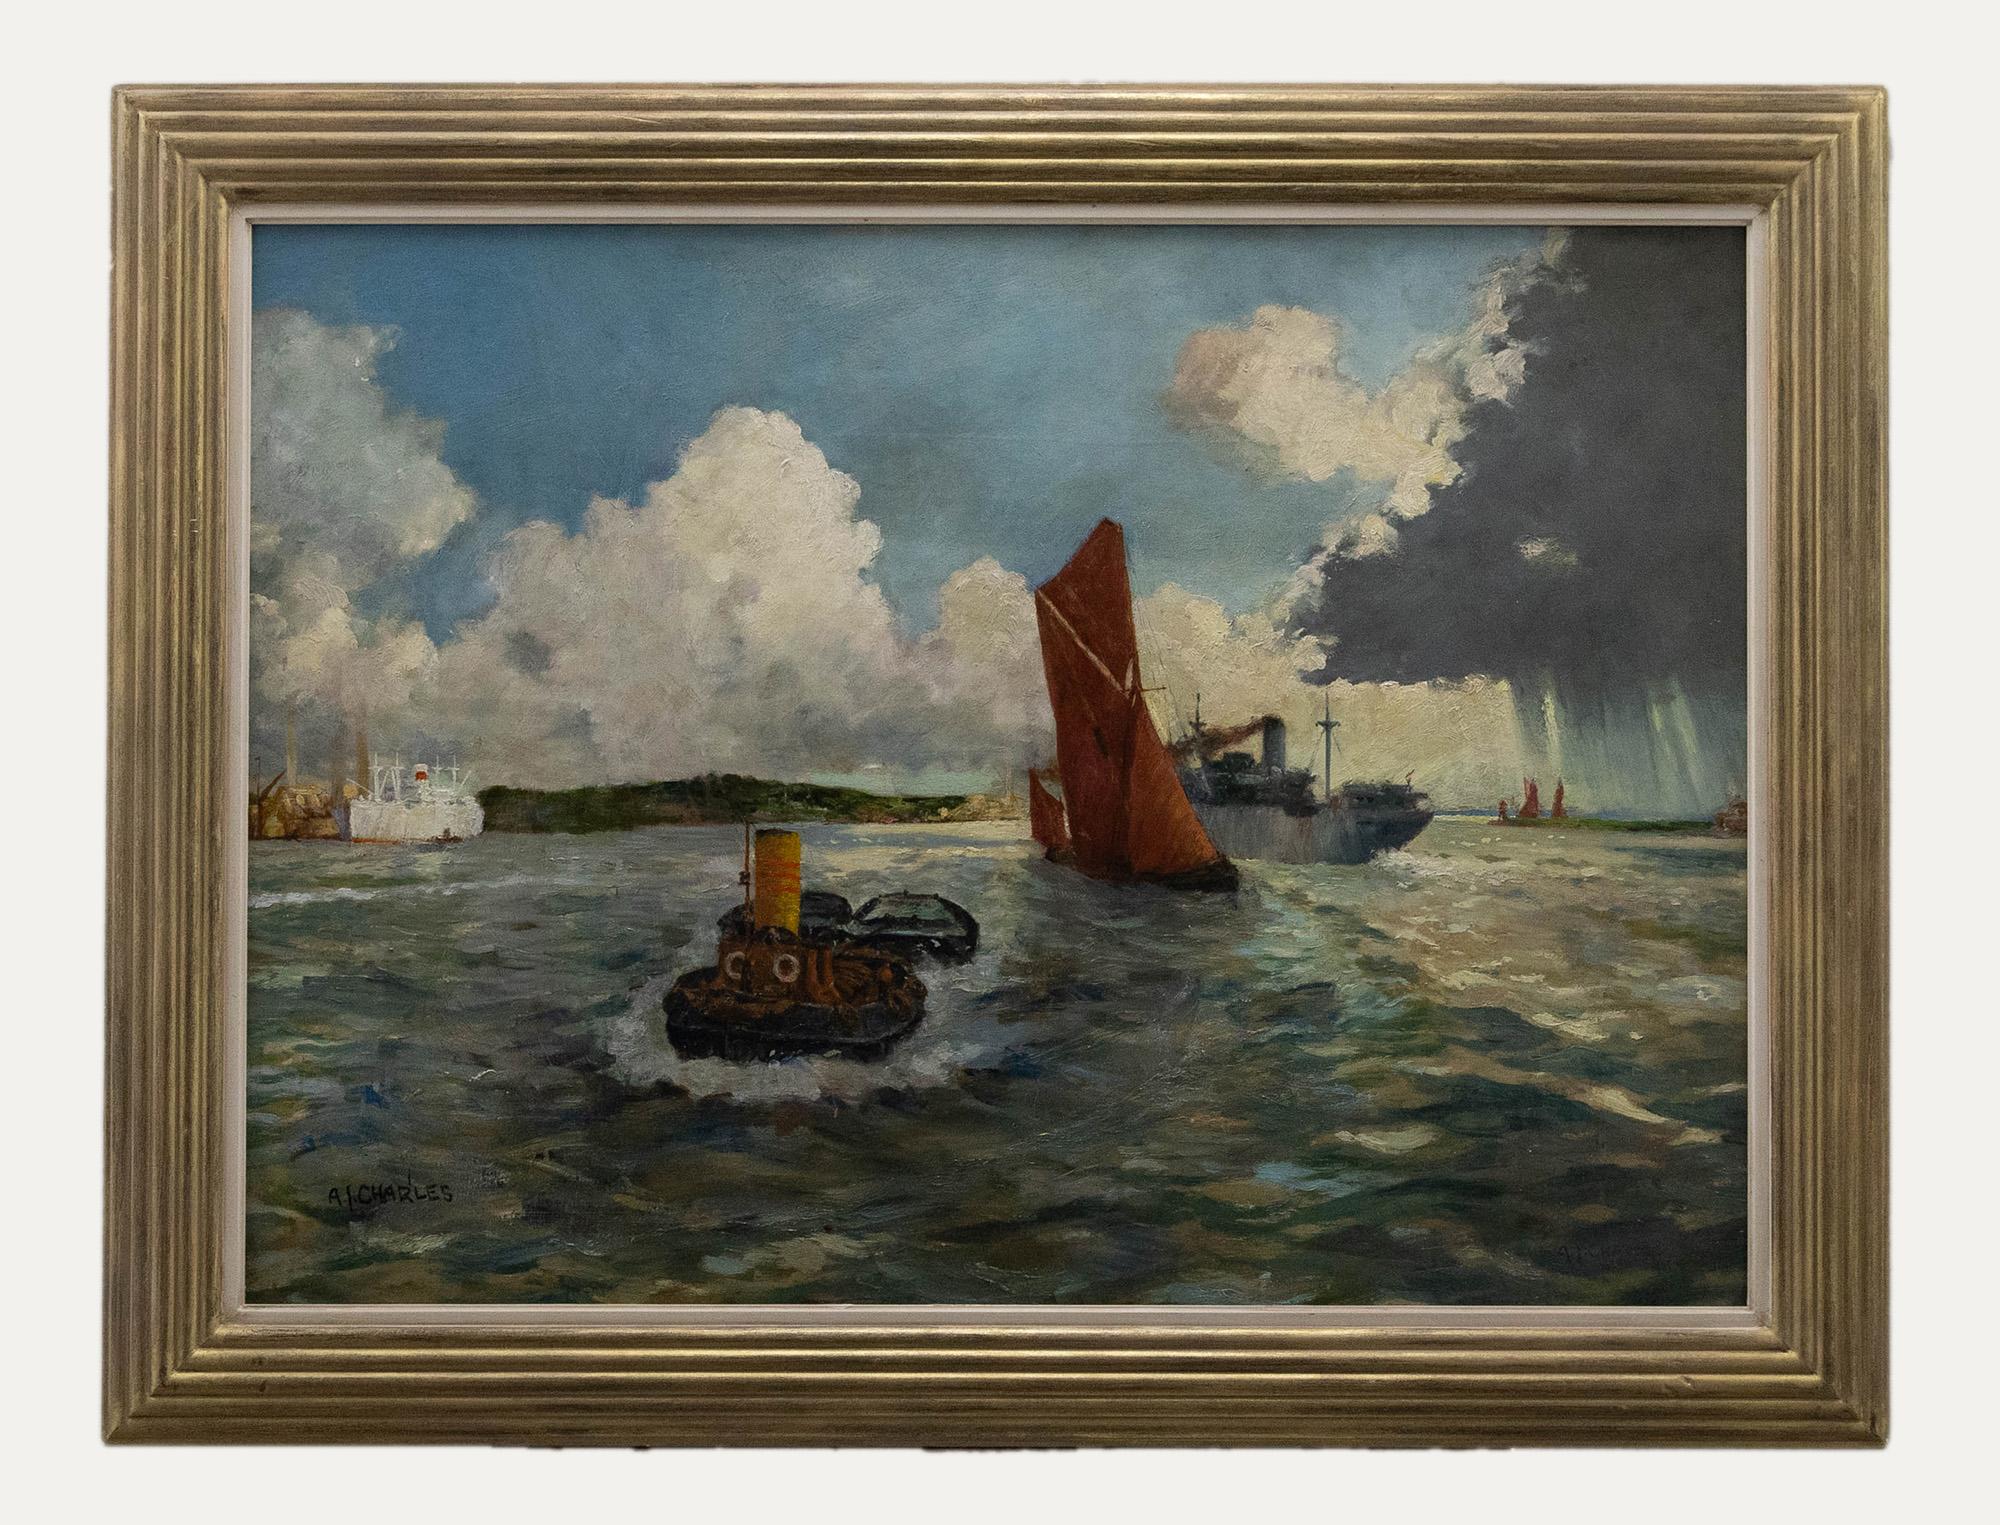 Unknown Figurative Painting - A. I. Charles - Framed 20th Century Oil, Tug Towing Two Barges